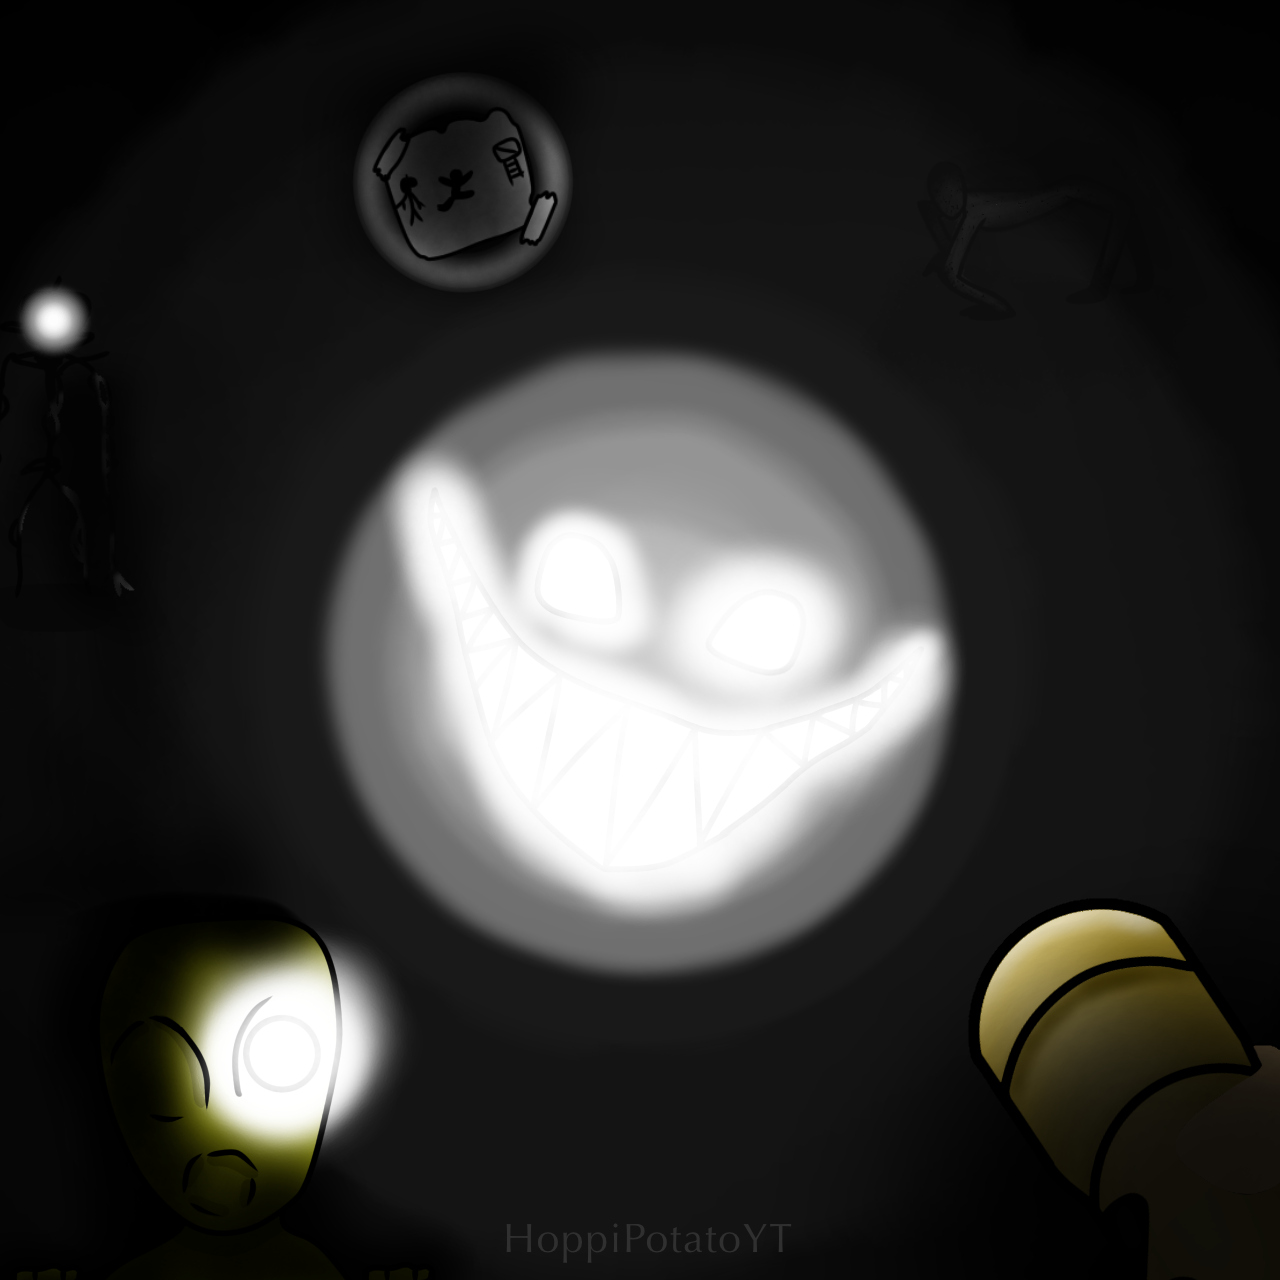 N1ghtc0re on X: The poolroom stresses me out.. love it tho!! #Roblox # Apeirophobia #robloxart #backrooms #artwork @zones_RBLX love your game sir!   / X